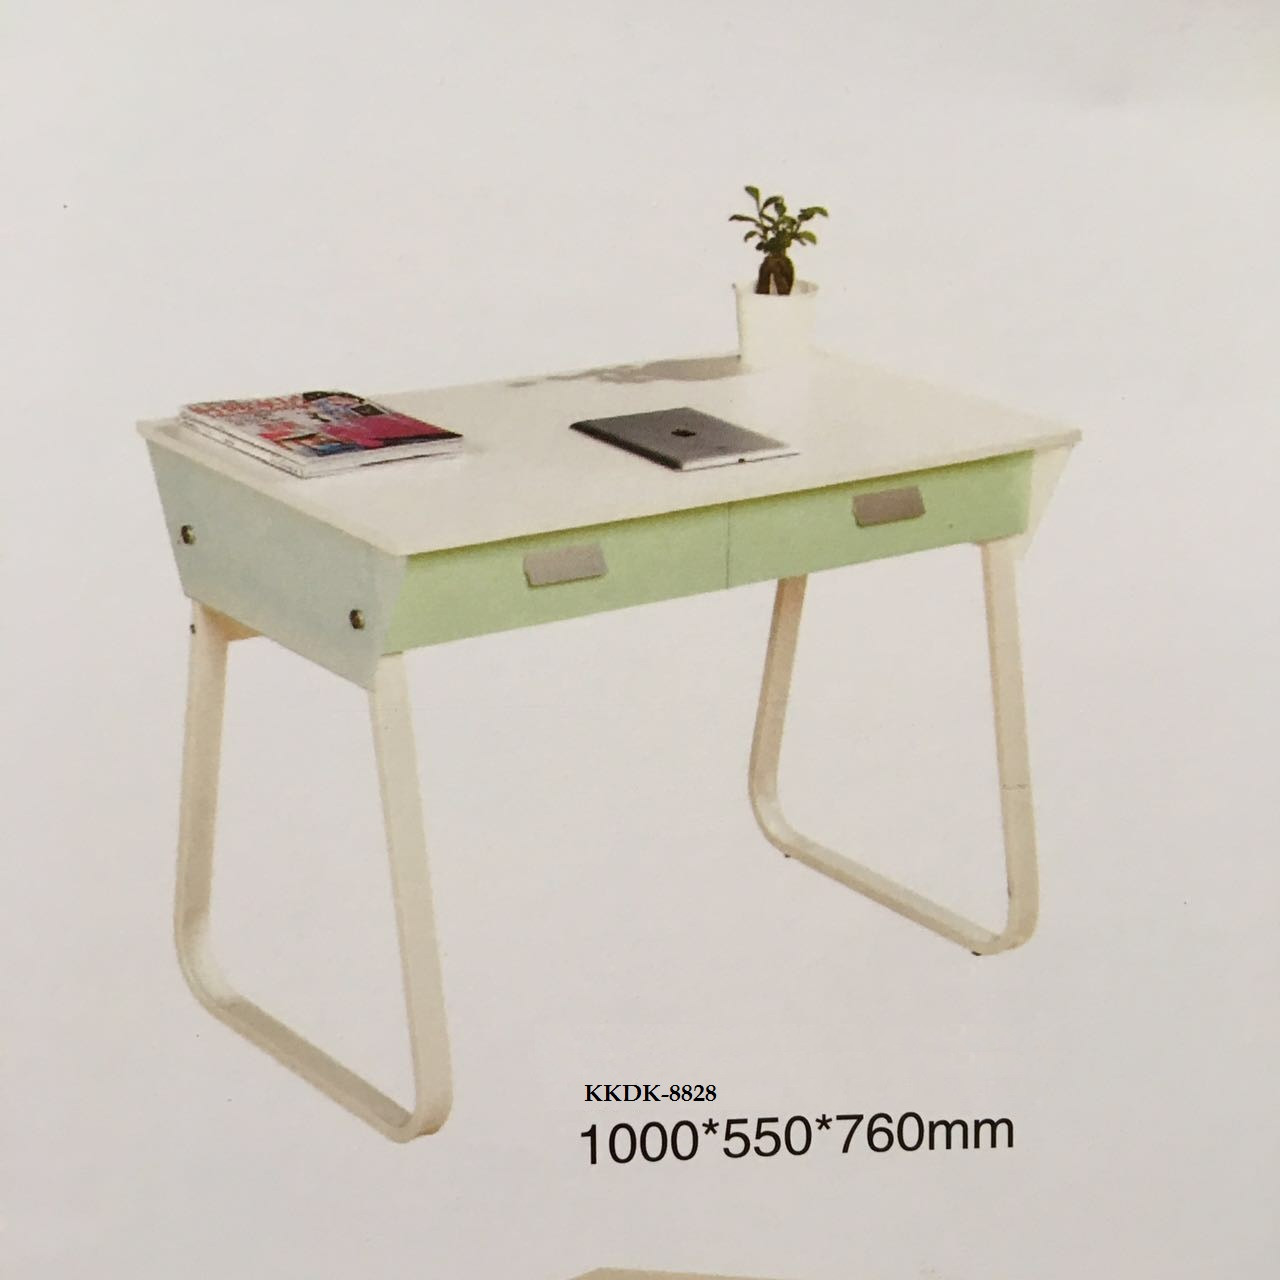 Study Table For Kids
 Buy kids study tables and chairs online at Kids Kouch India